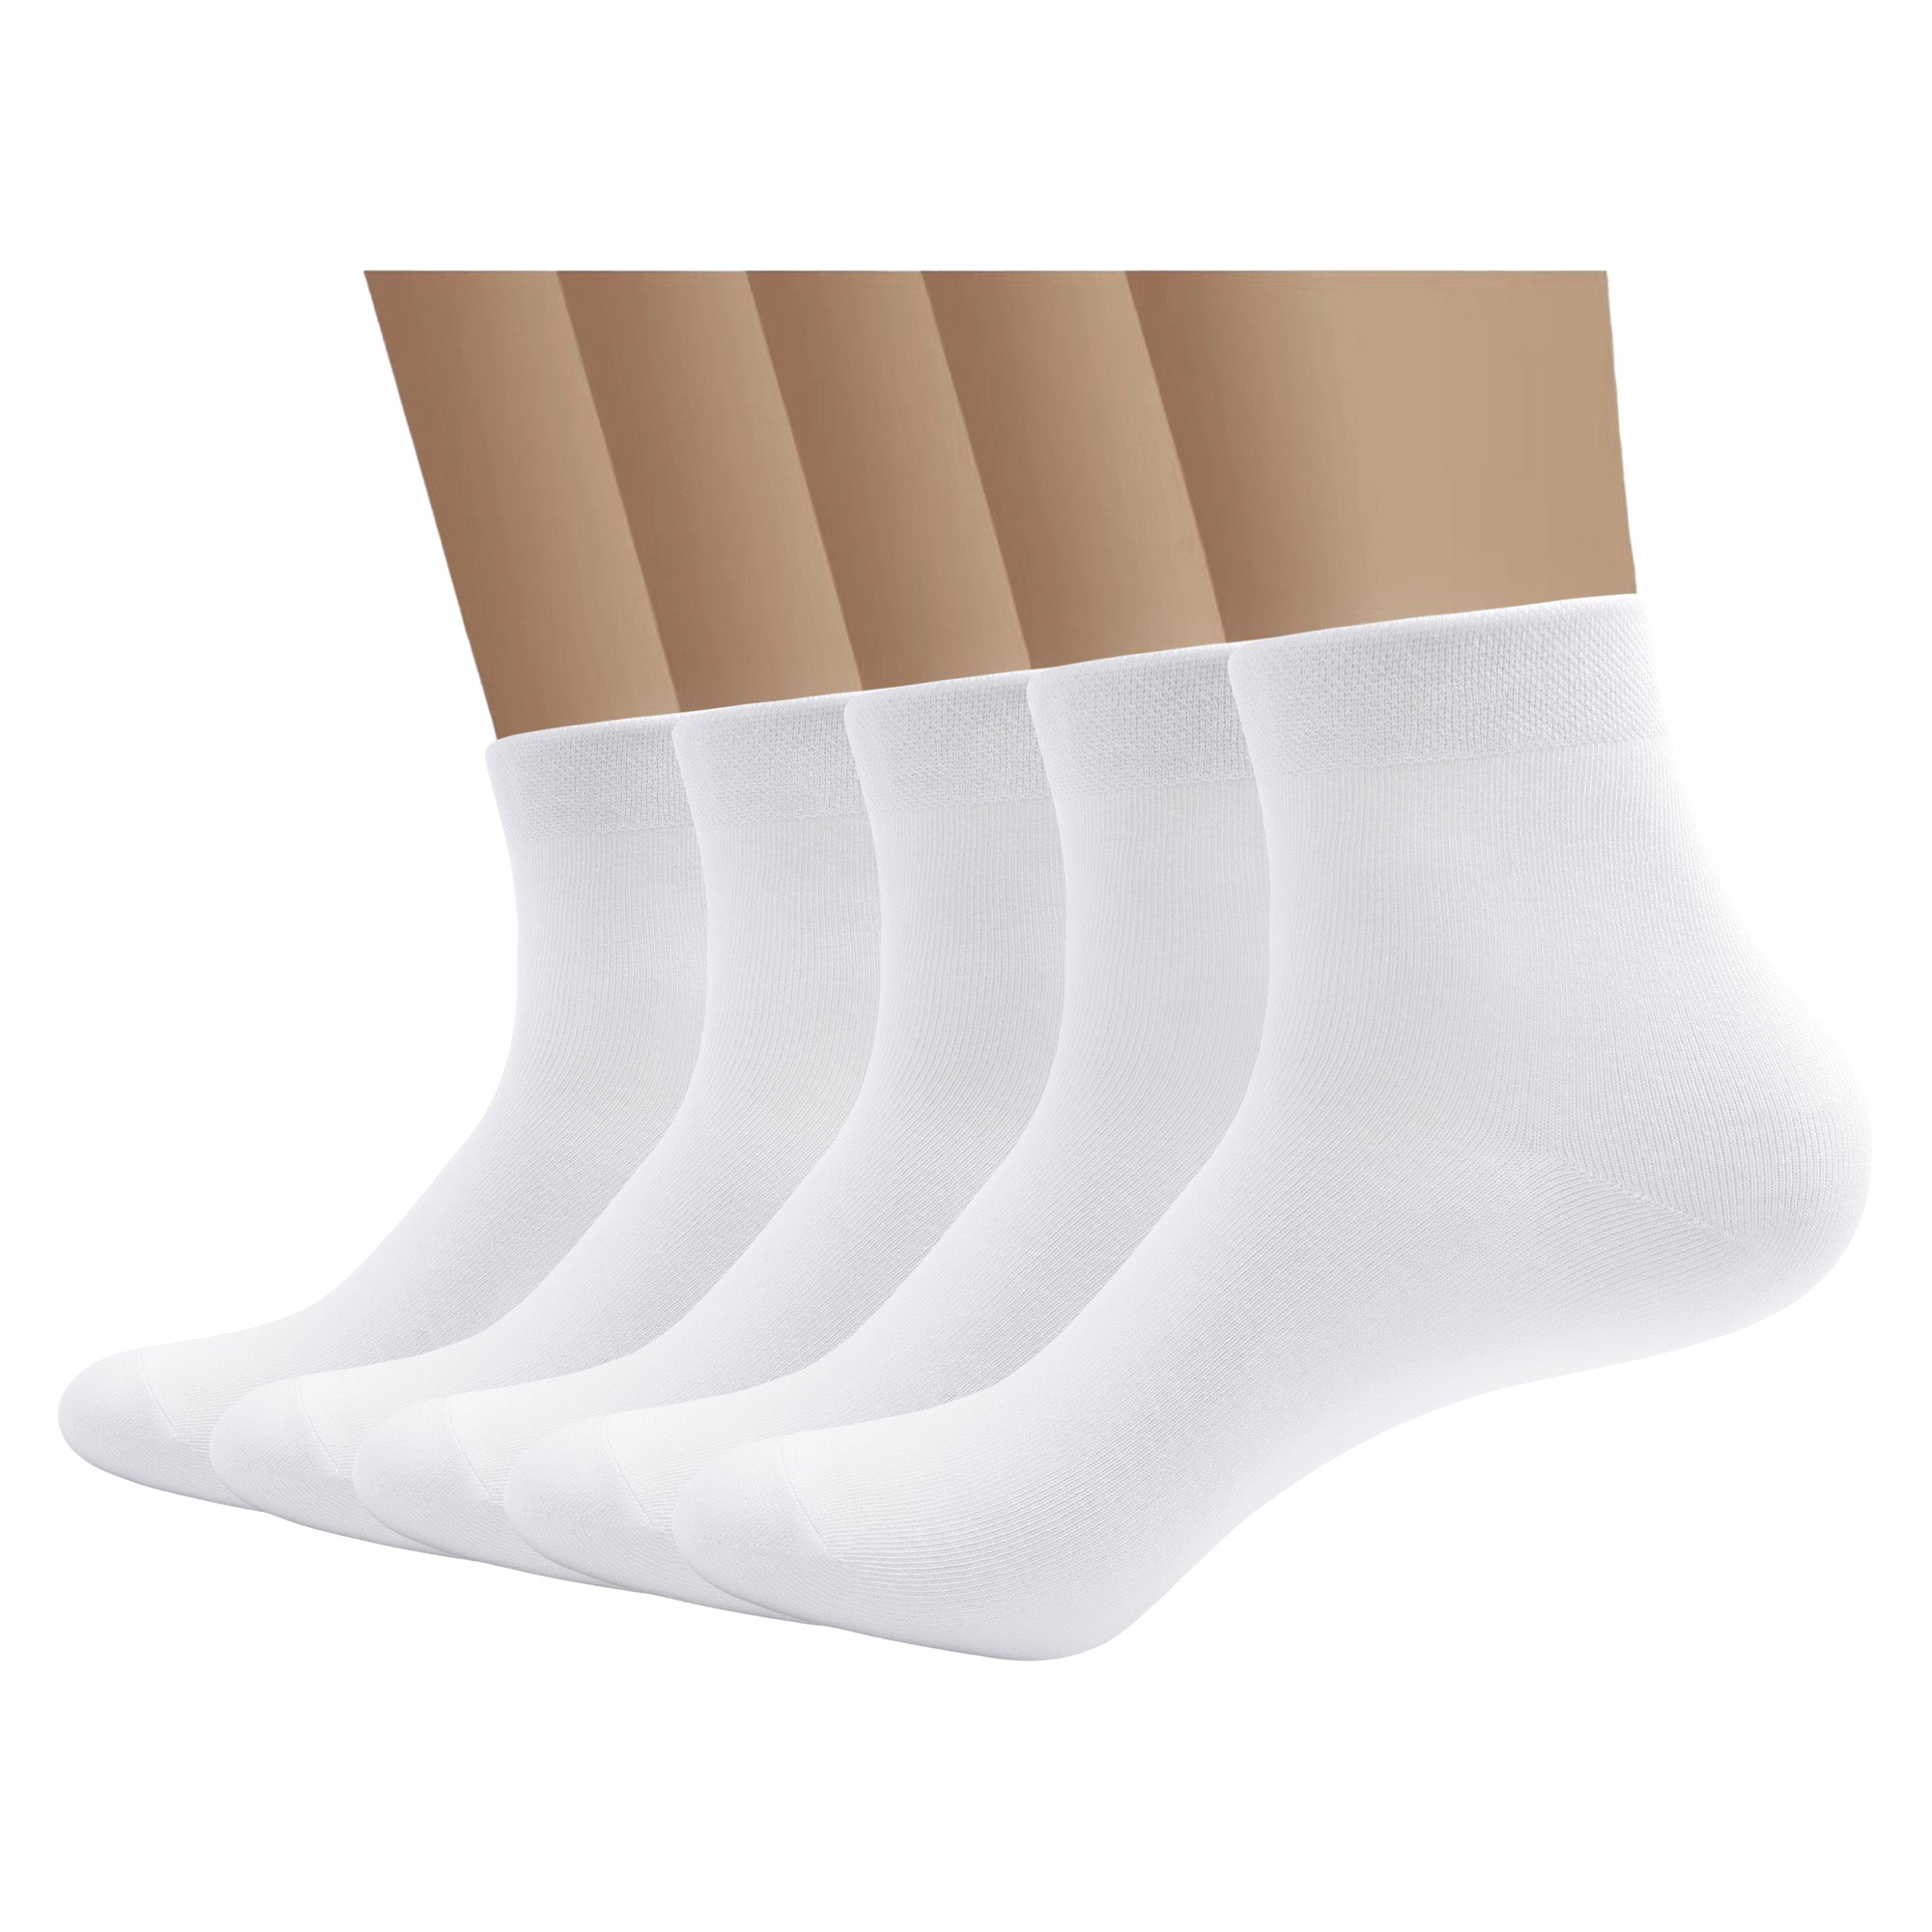 5pairs/pack Women's Simple & Pithy & Breathable & All-match Anti-slip No  Show Socks